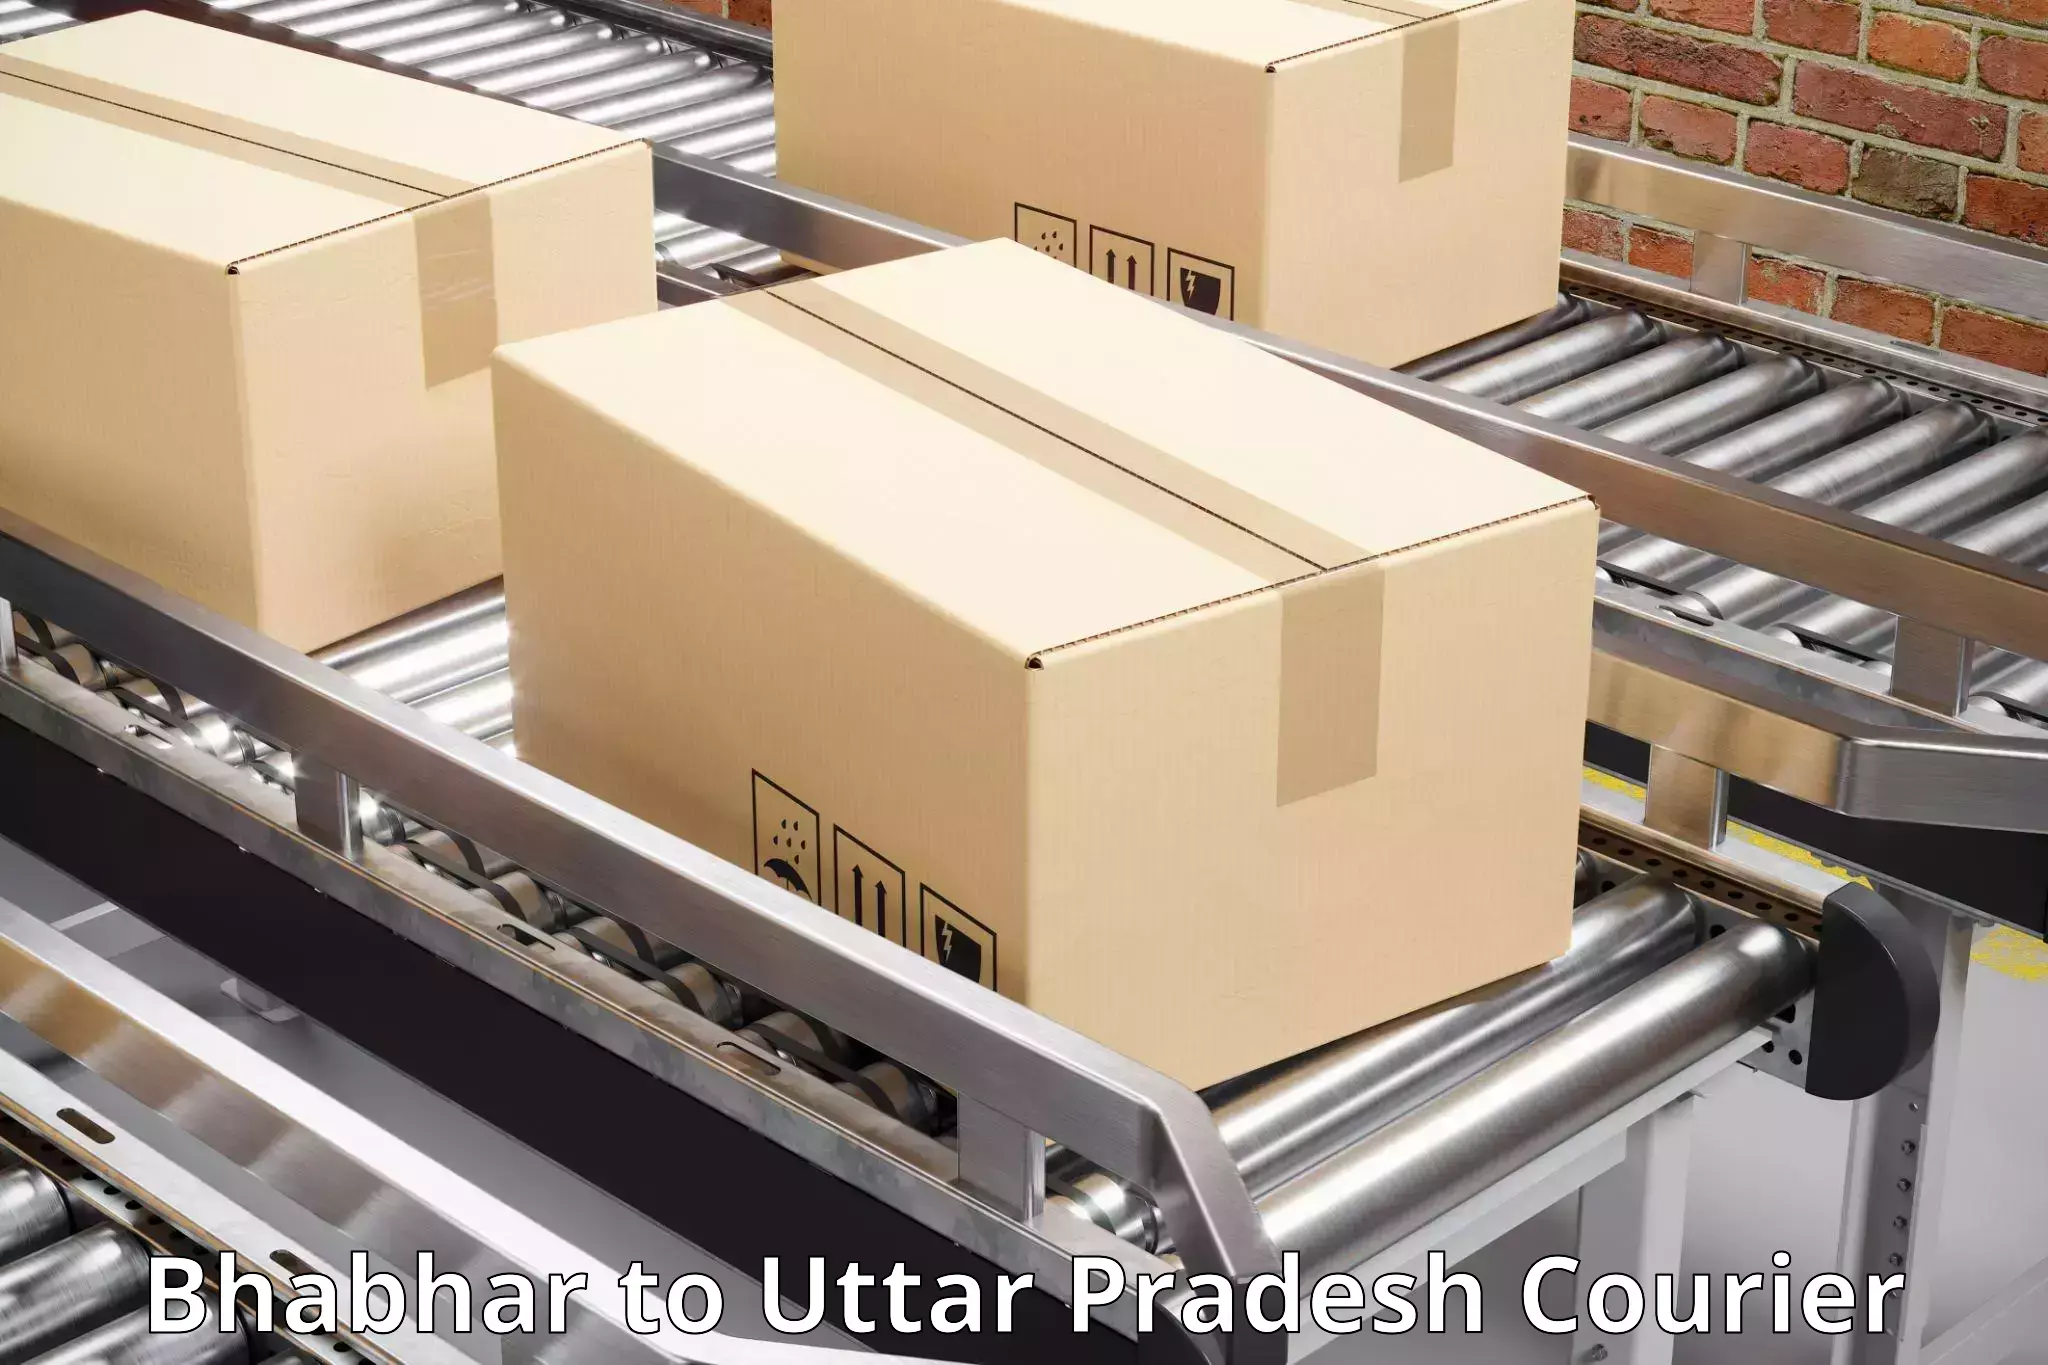 Personal courier services Bhabhar to Agra